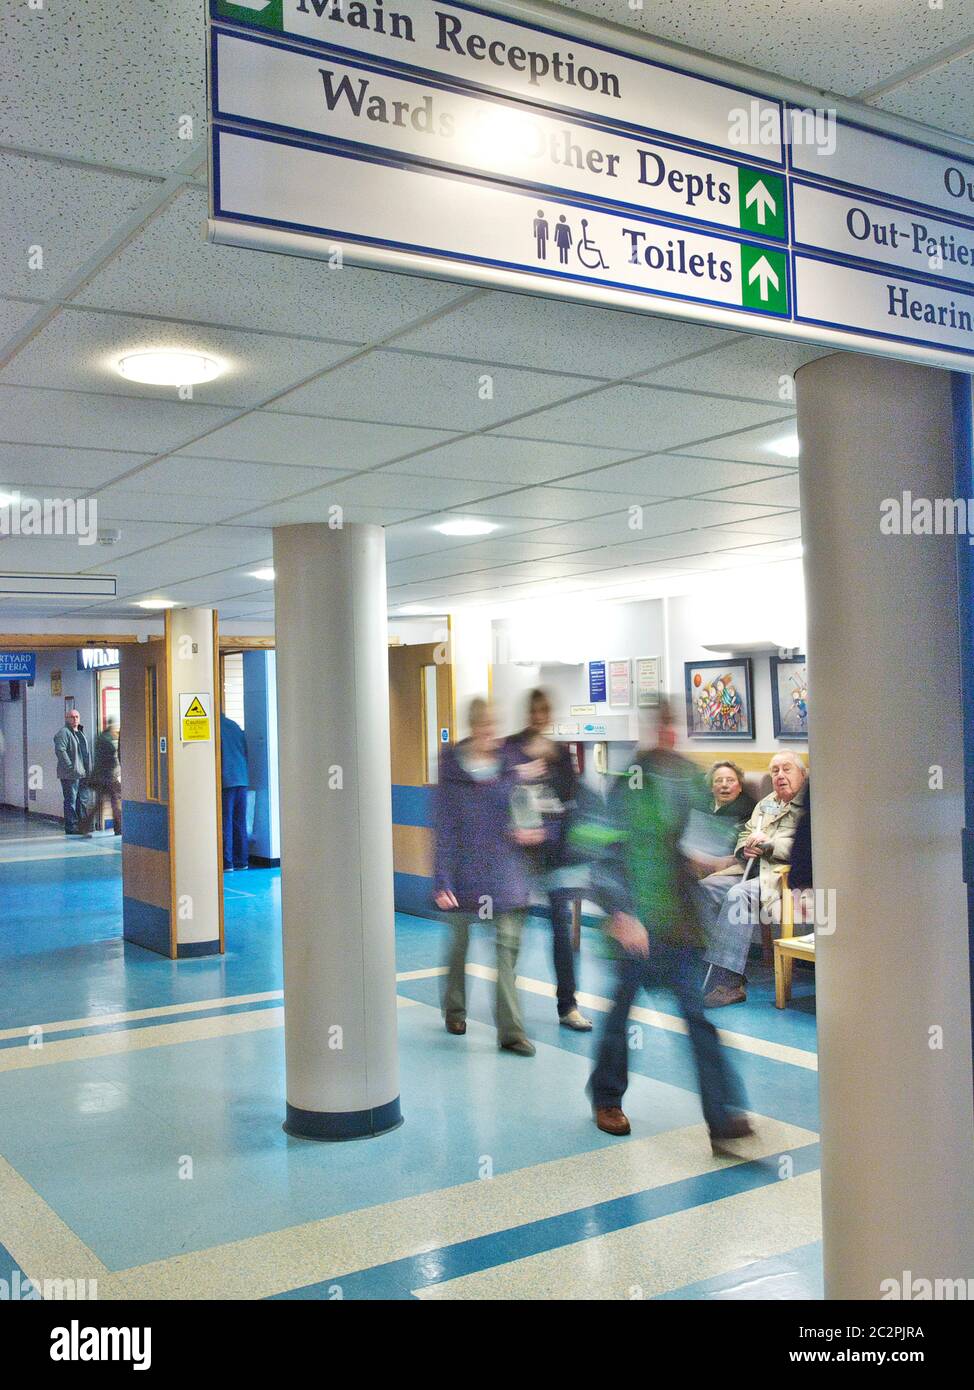 Busy UK NHS hospital and healthcare outpatients departments at a British Hospital. Patients sitting, walking and moving and doctor going through doors Stock Photo